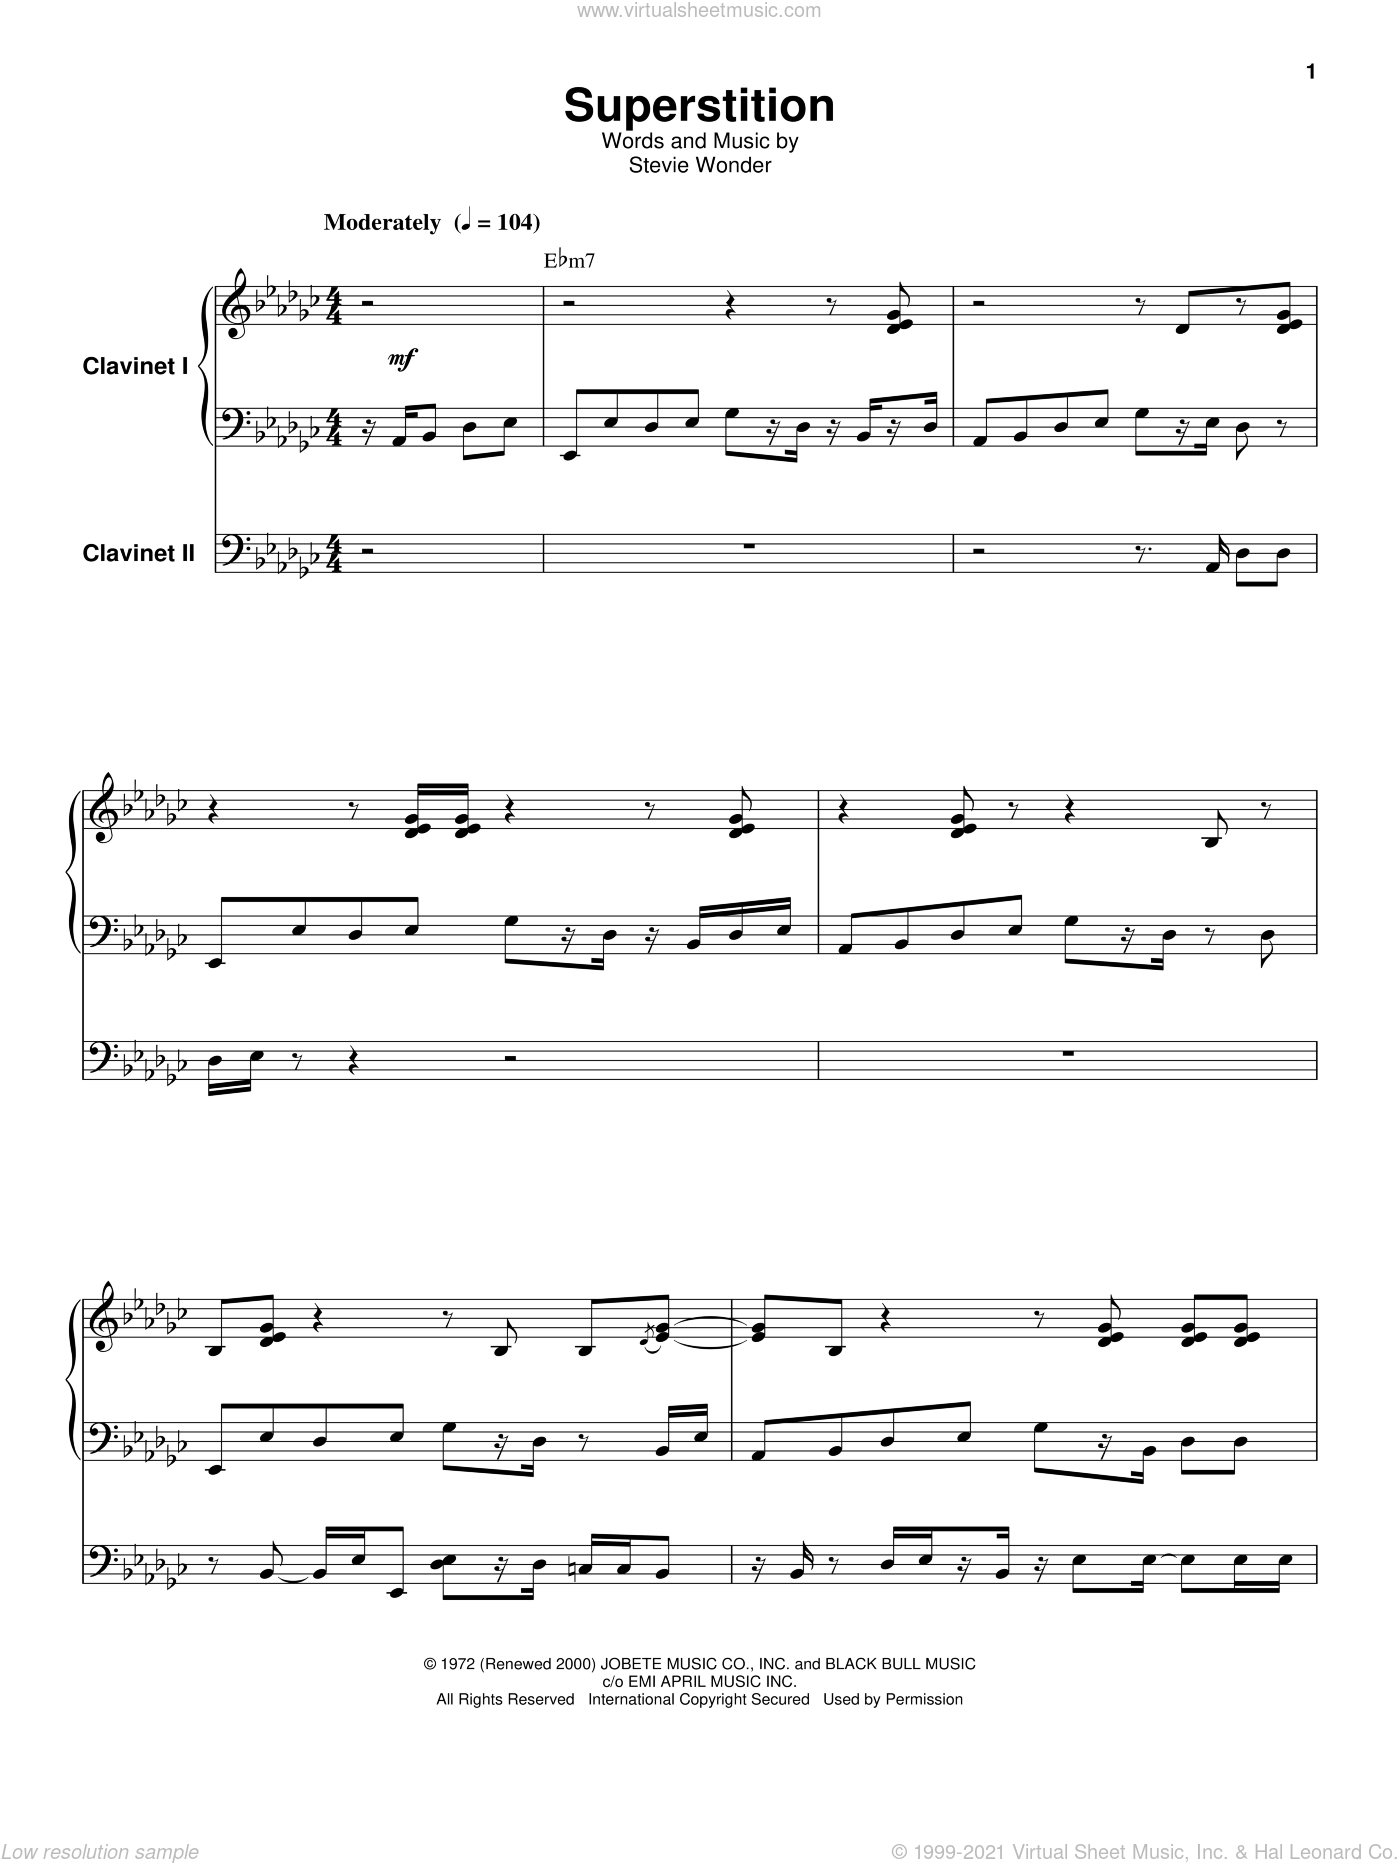 Wonder - Superstition sheet music for keyboard or piano [PDF]